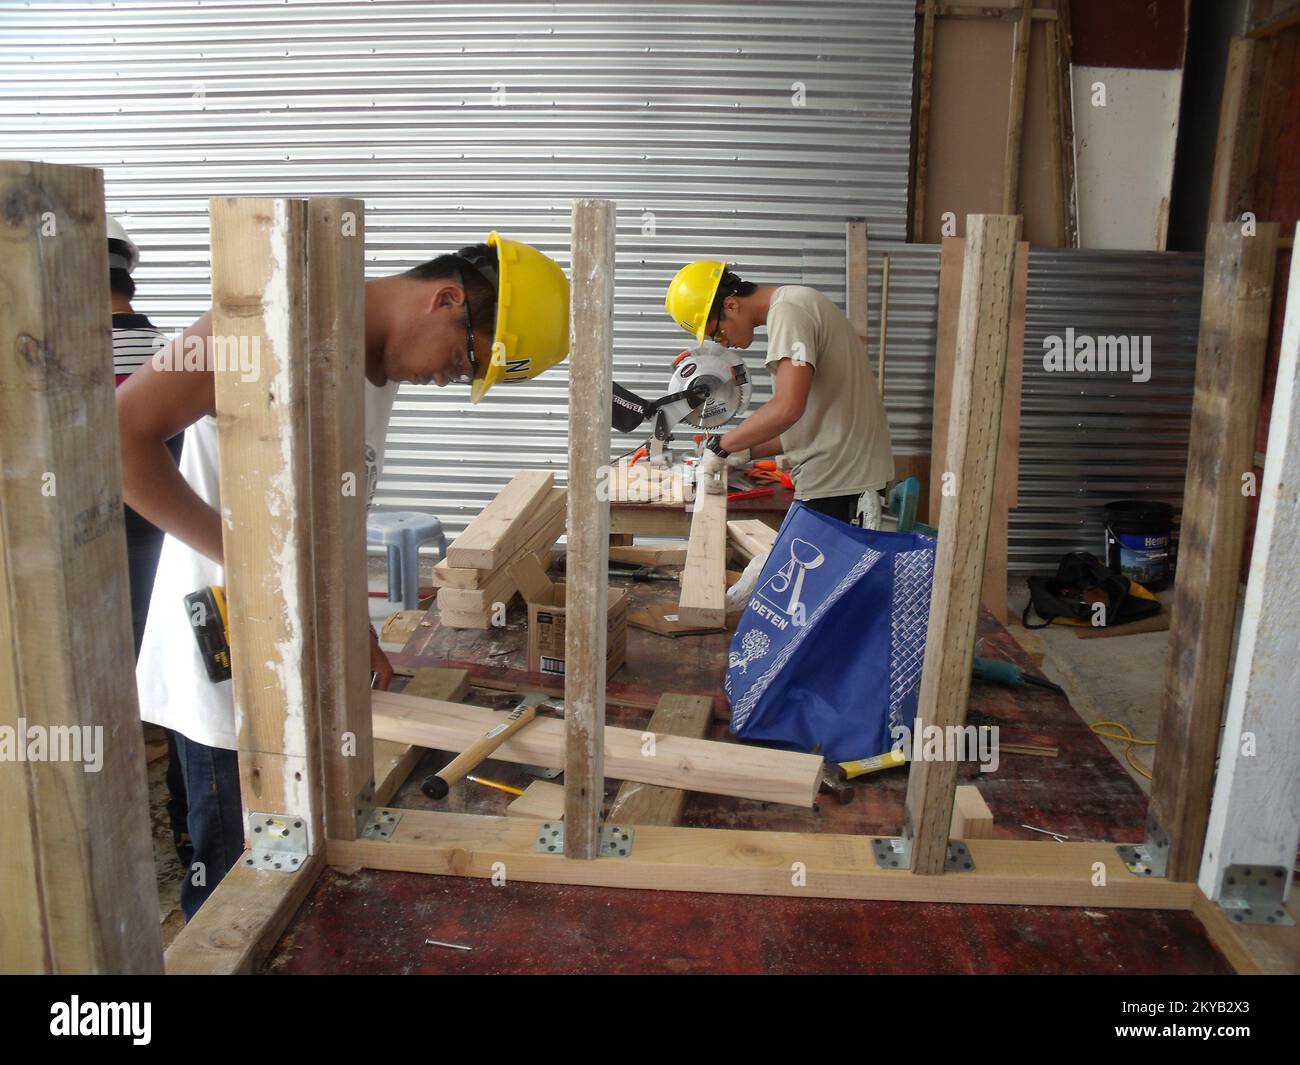 NMTI students constructing the hazard mitigation models with lumber, nails and metal fasteners supplied by True Value and ACE Hardware stores.. Saipan, CNMI 11/3/2015&nbsp; NMTI students constructing the hazard mitigation models with lumber, nails and metal fasteners supplied by True Value and ACE Hardware stores.. Photographs Relating to Disasters and Emergency Management Programs, Activities, and Officials Stock Photo